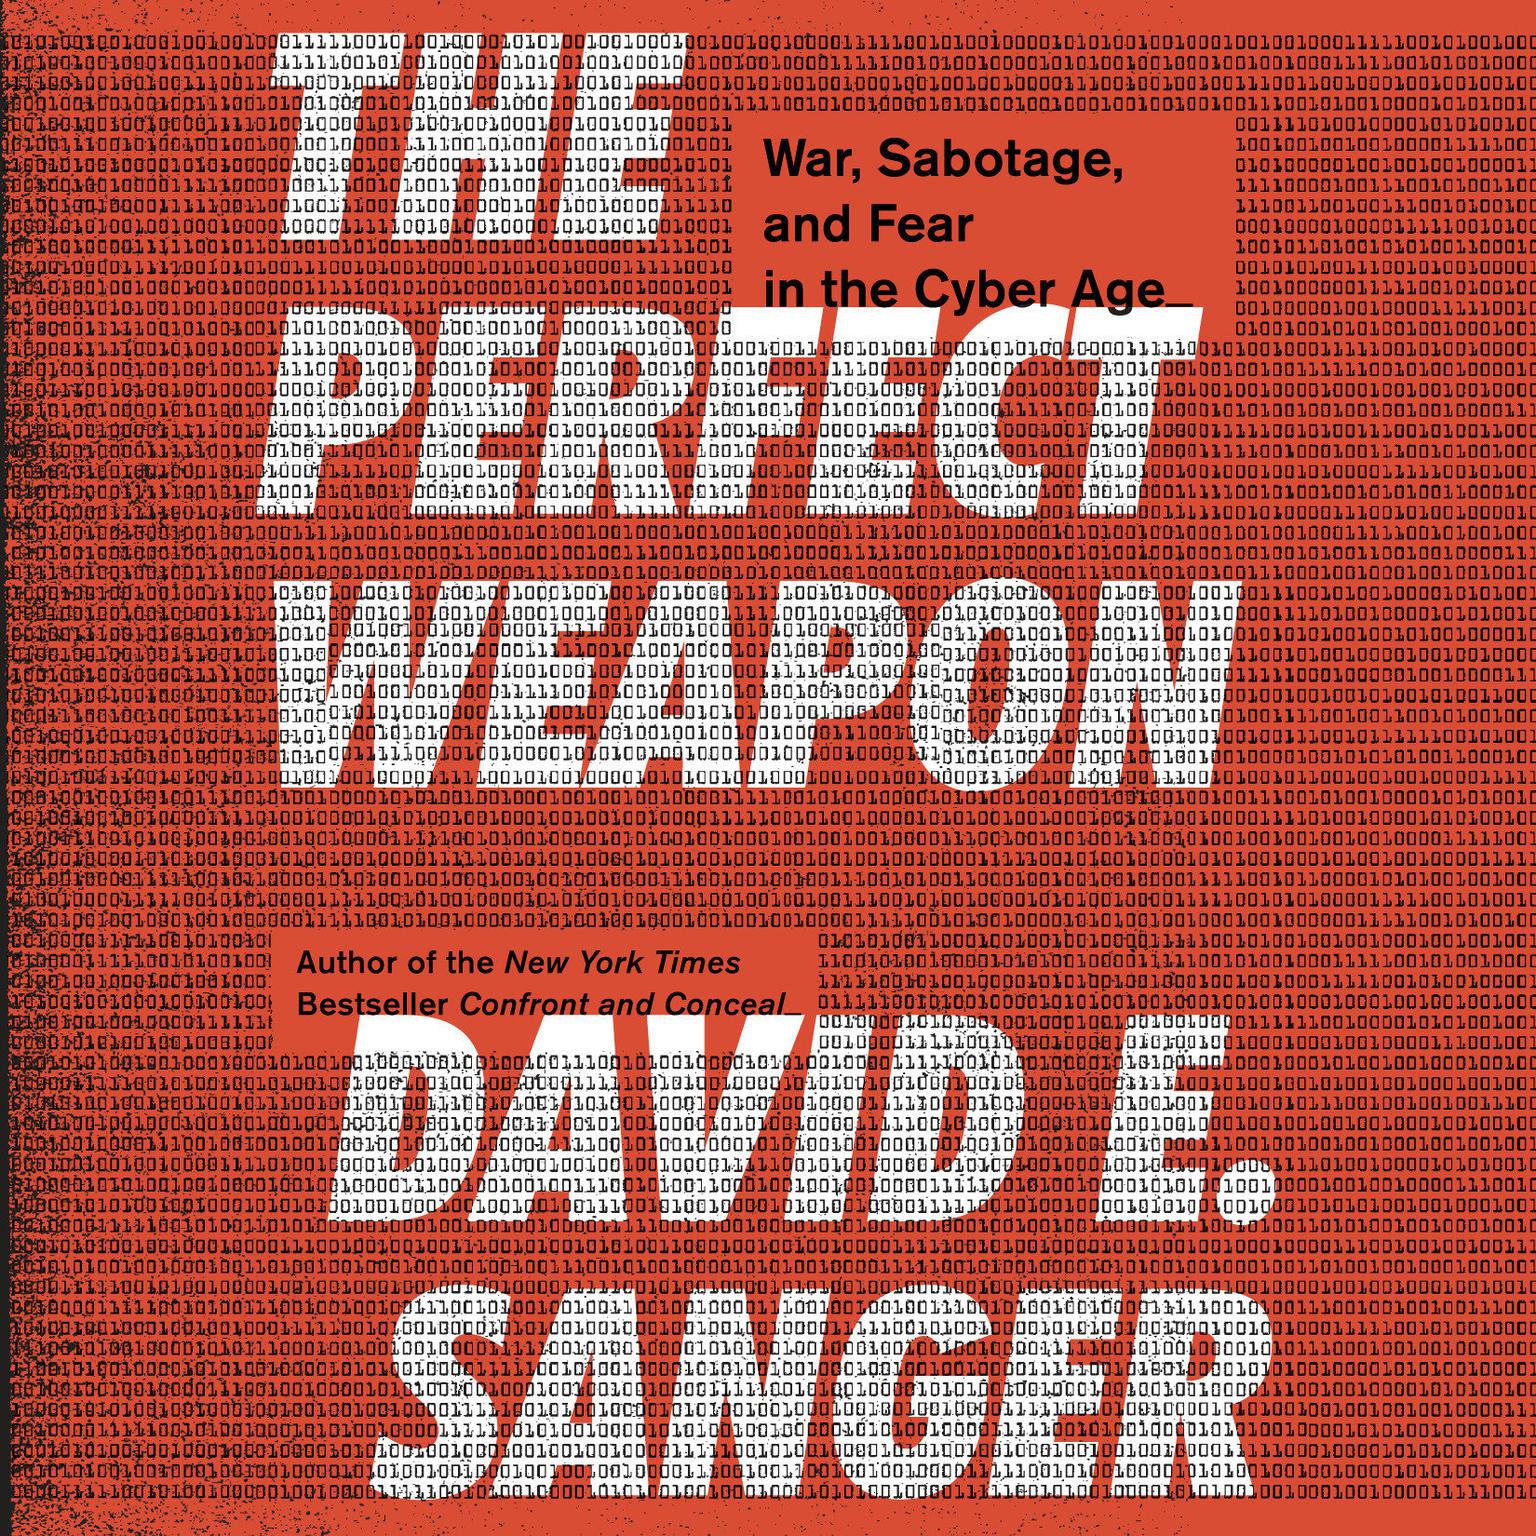 The Perfect Weapon: War, Sabotage, and Fear in the Cyber Age Audiobook, by David E. Sanger